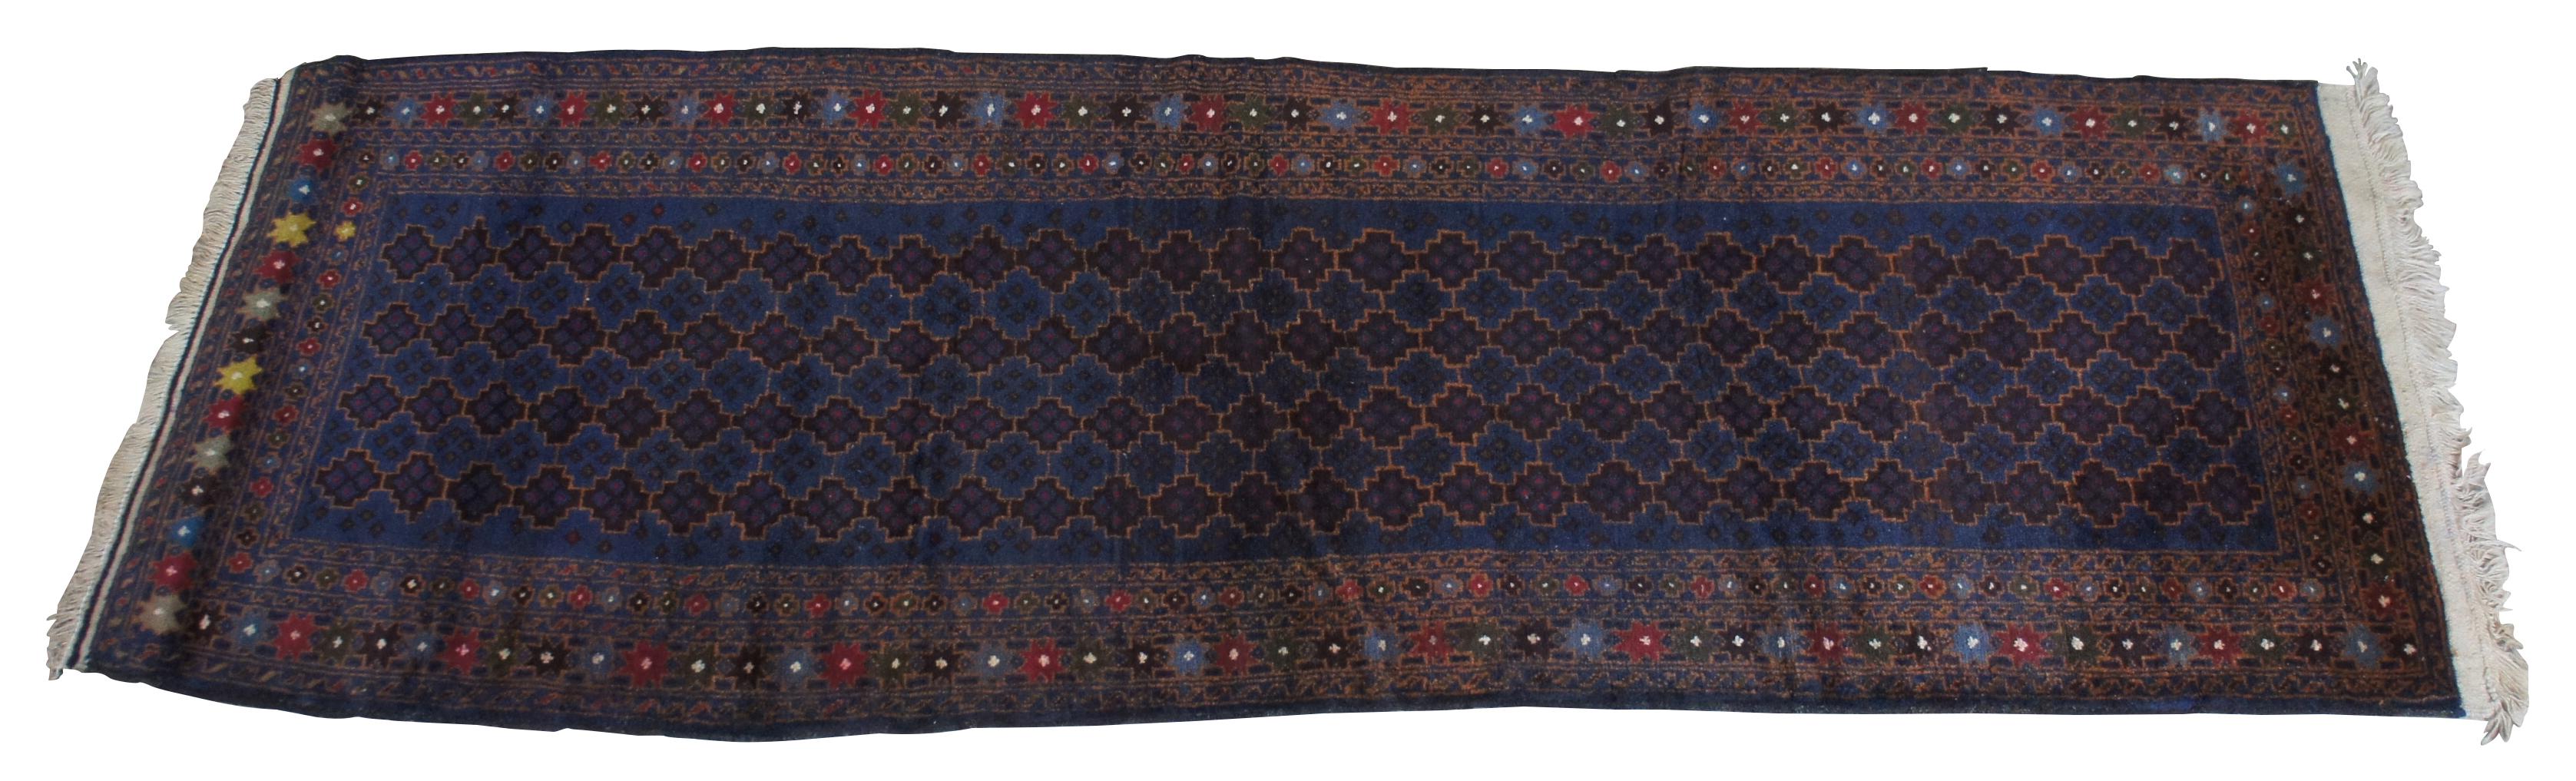 Mid 20th century wool nomadic Kazak rug from Afghanistan. Features a field of blue with geometric design and colorful border of 8 point stars.
  